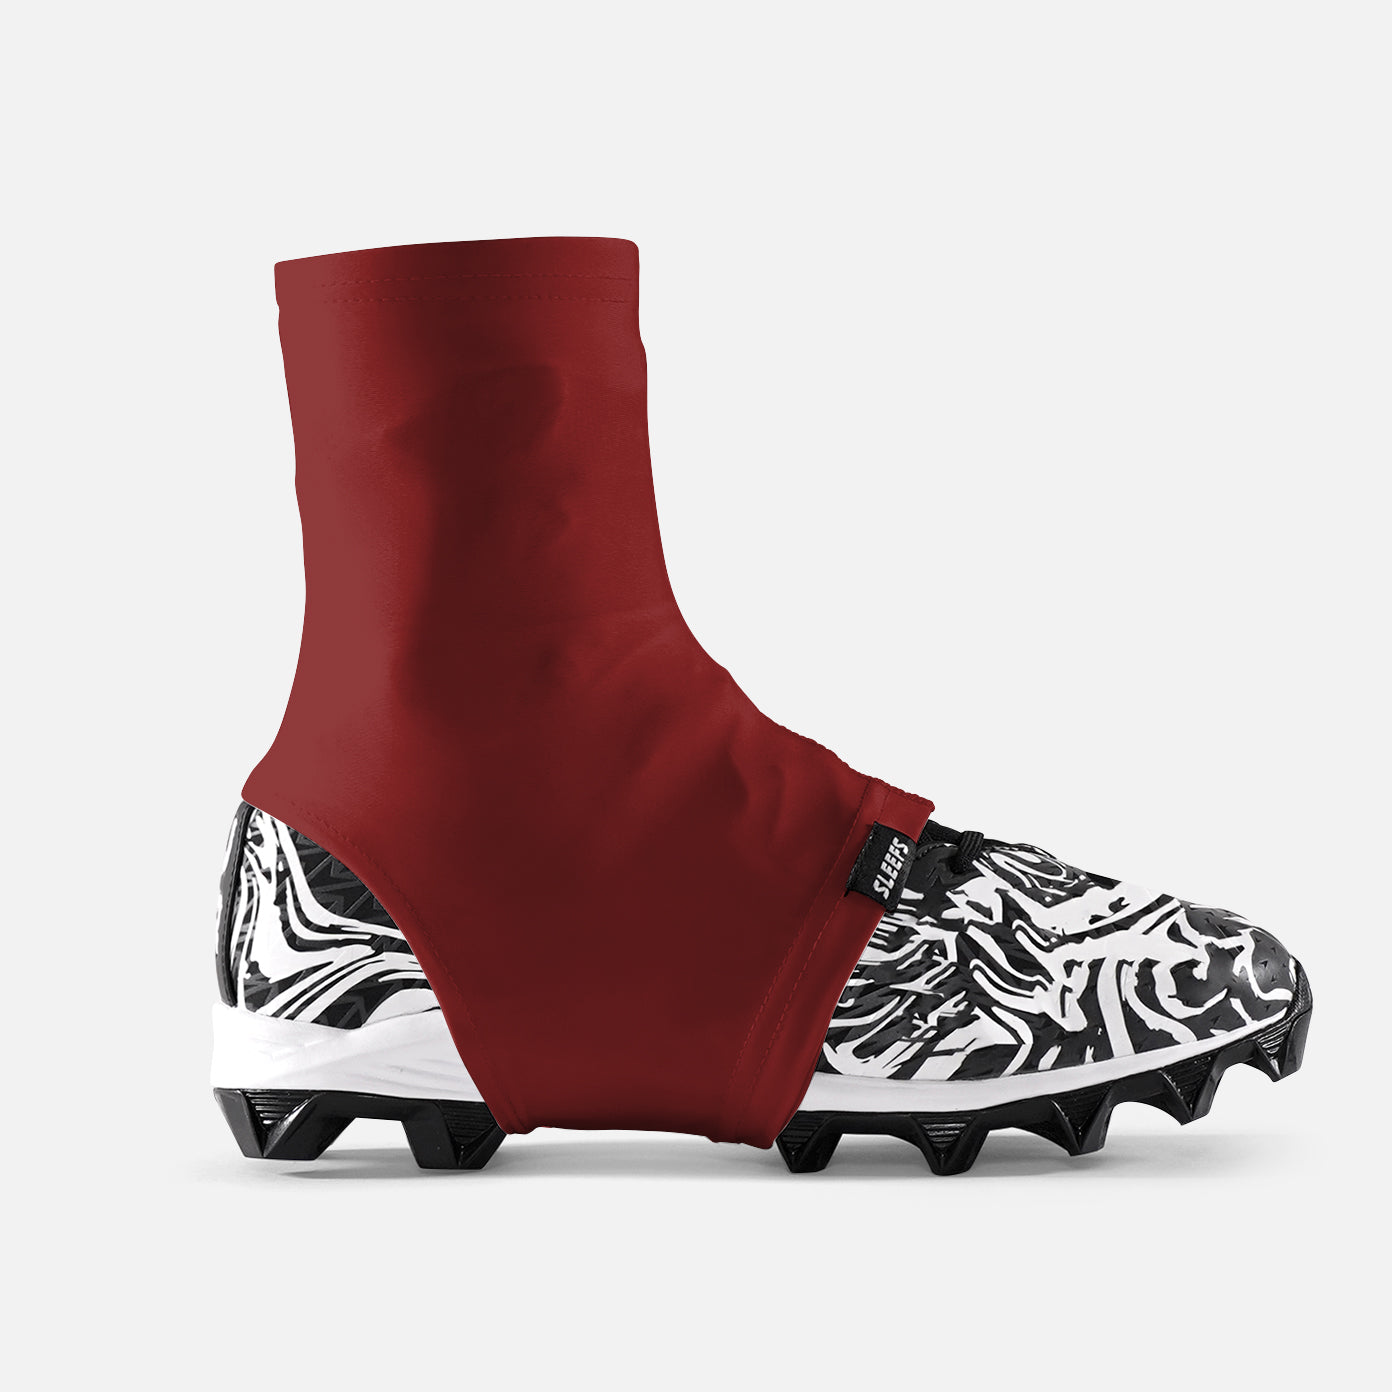 Hue Maroon Kids Spats / Cleat Covers